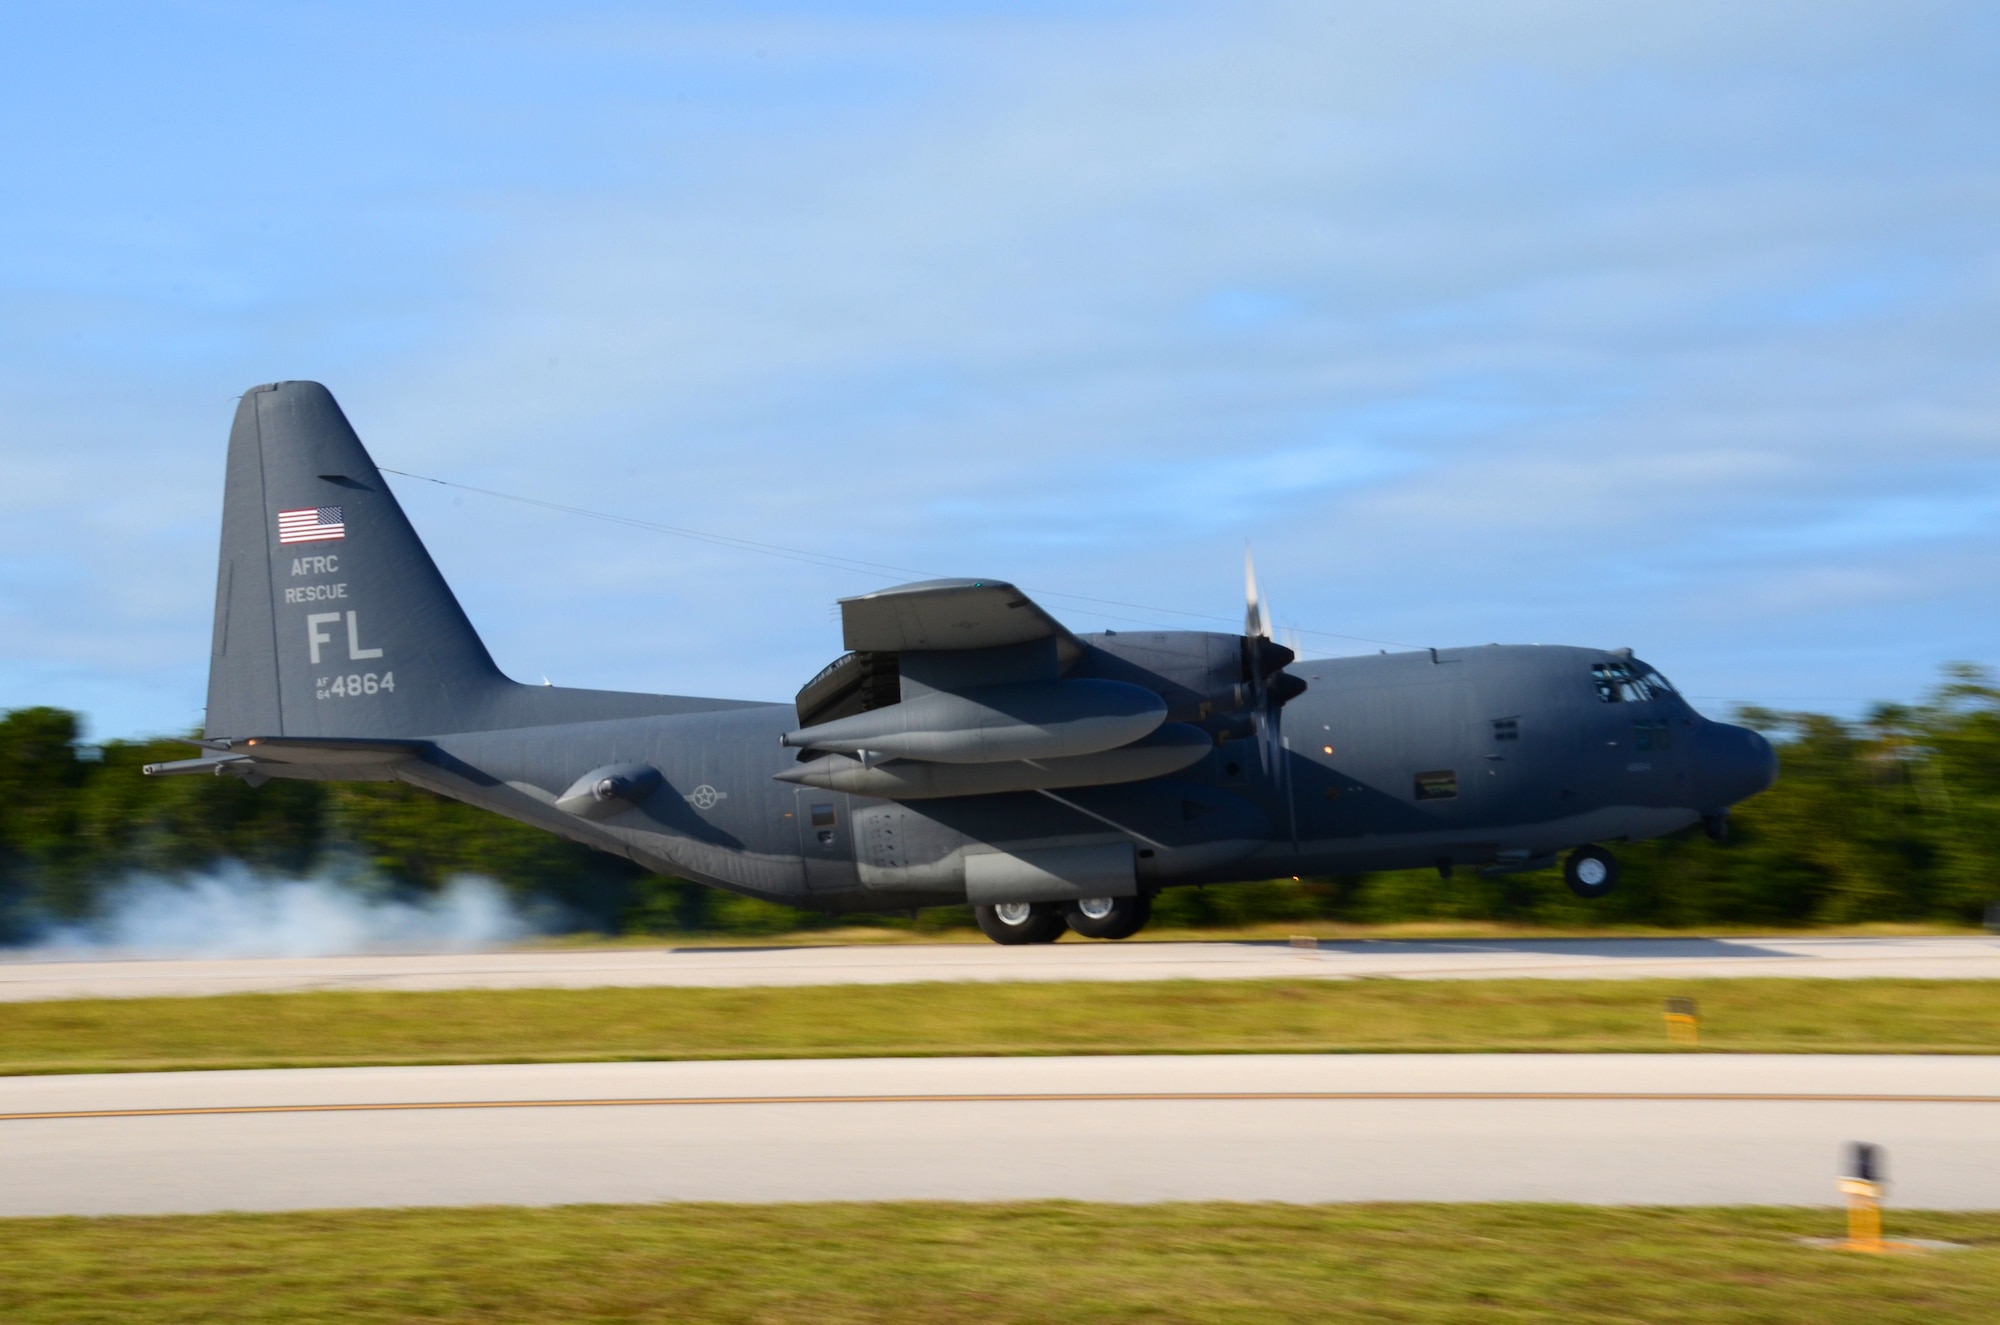 U.S. Airmen from the 39th Rescue Squadron, Patrick Air Force Base, Fla., pilot an HC-130P/N King aircraft in search and rescue competition at Marathon Key, Fla., against Royal Canadian Airmen from the 435 Squadron, Manitoba, Canada. The competition encompasses various scenarios to include a spot landing competition to test their precision landing skills. (U.S. Air Force photo/Senior Airman Natasha Dowridge)